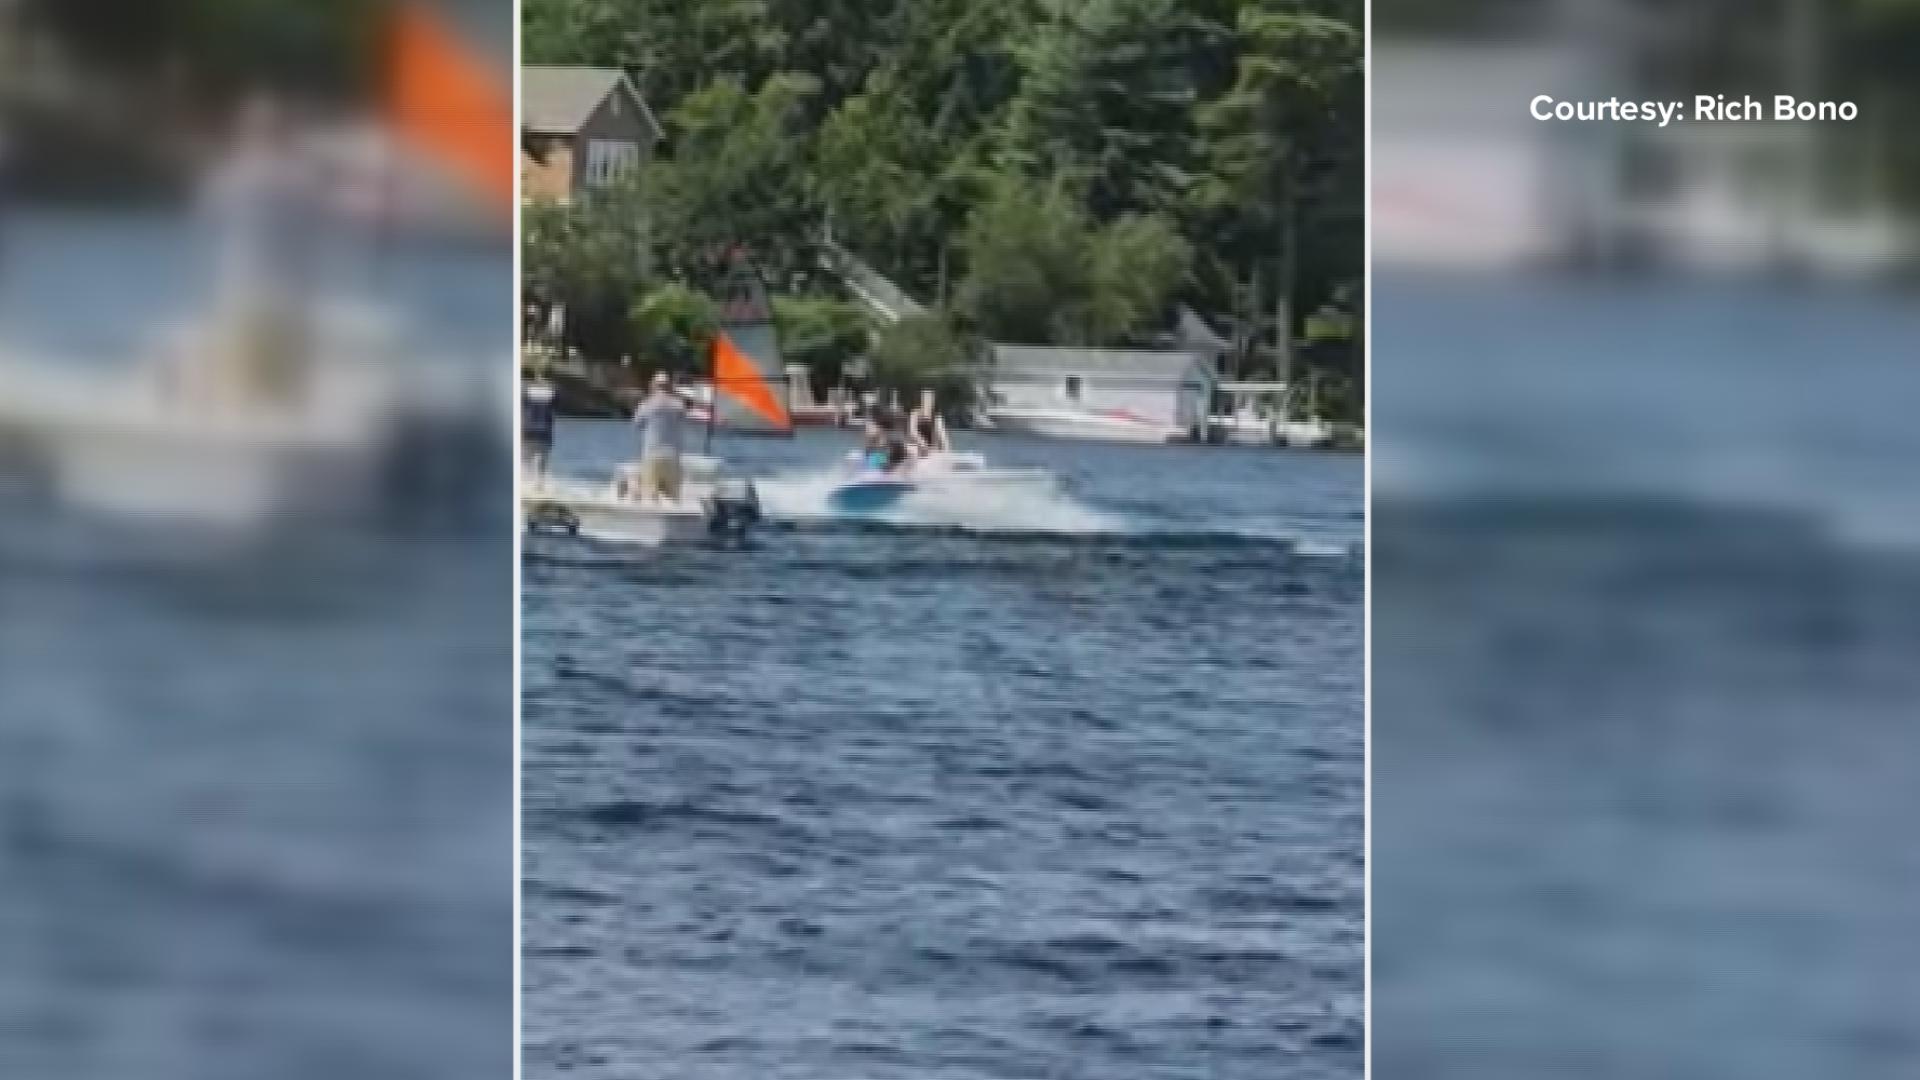 A teenager sprang into action Wednesday and managed to wrangle a runaway boat on Lake Winnipesaukee in New Hampshire. Courtesy: Rich Bon